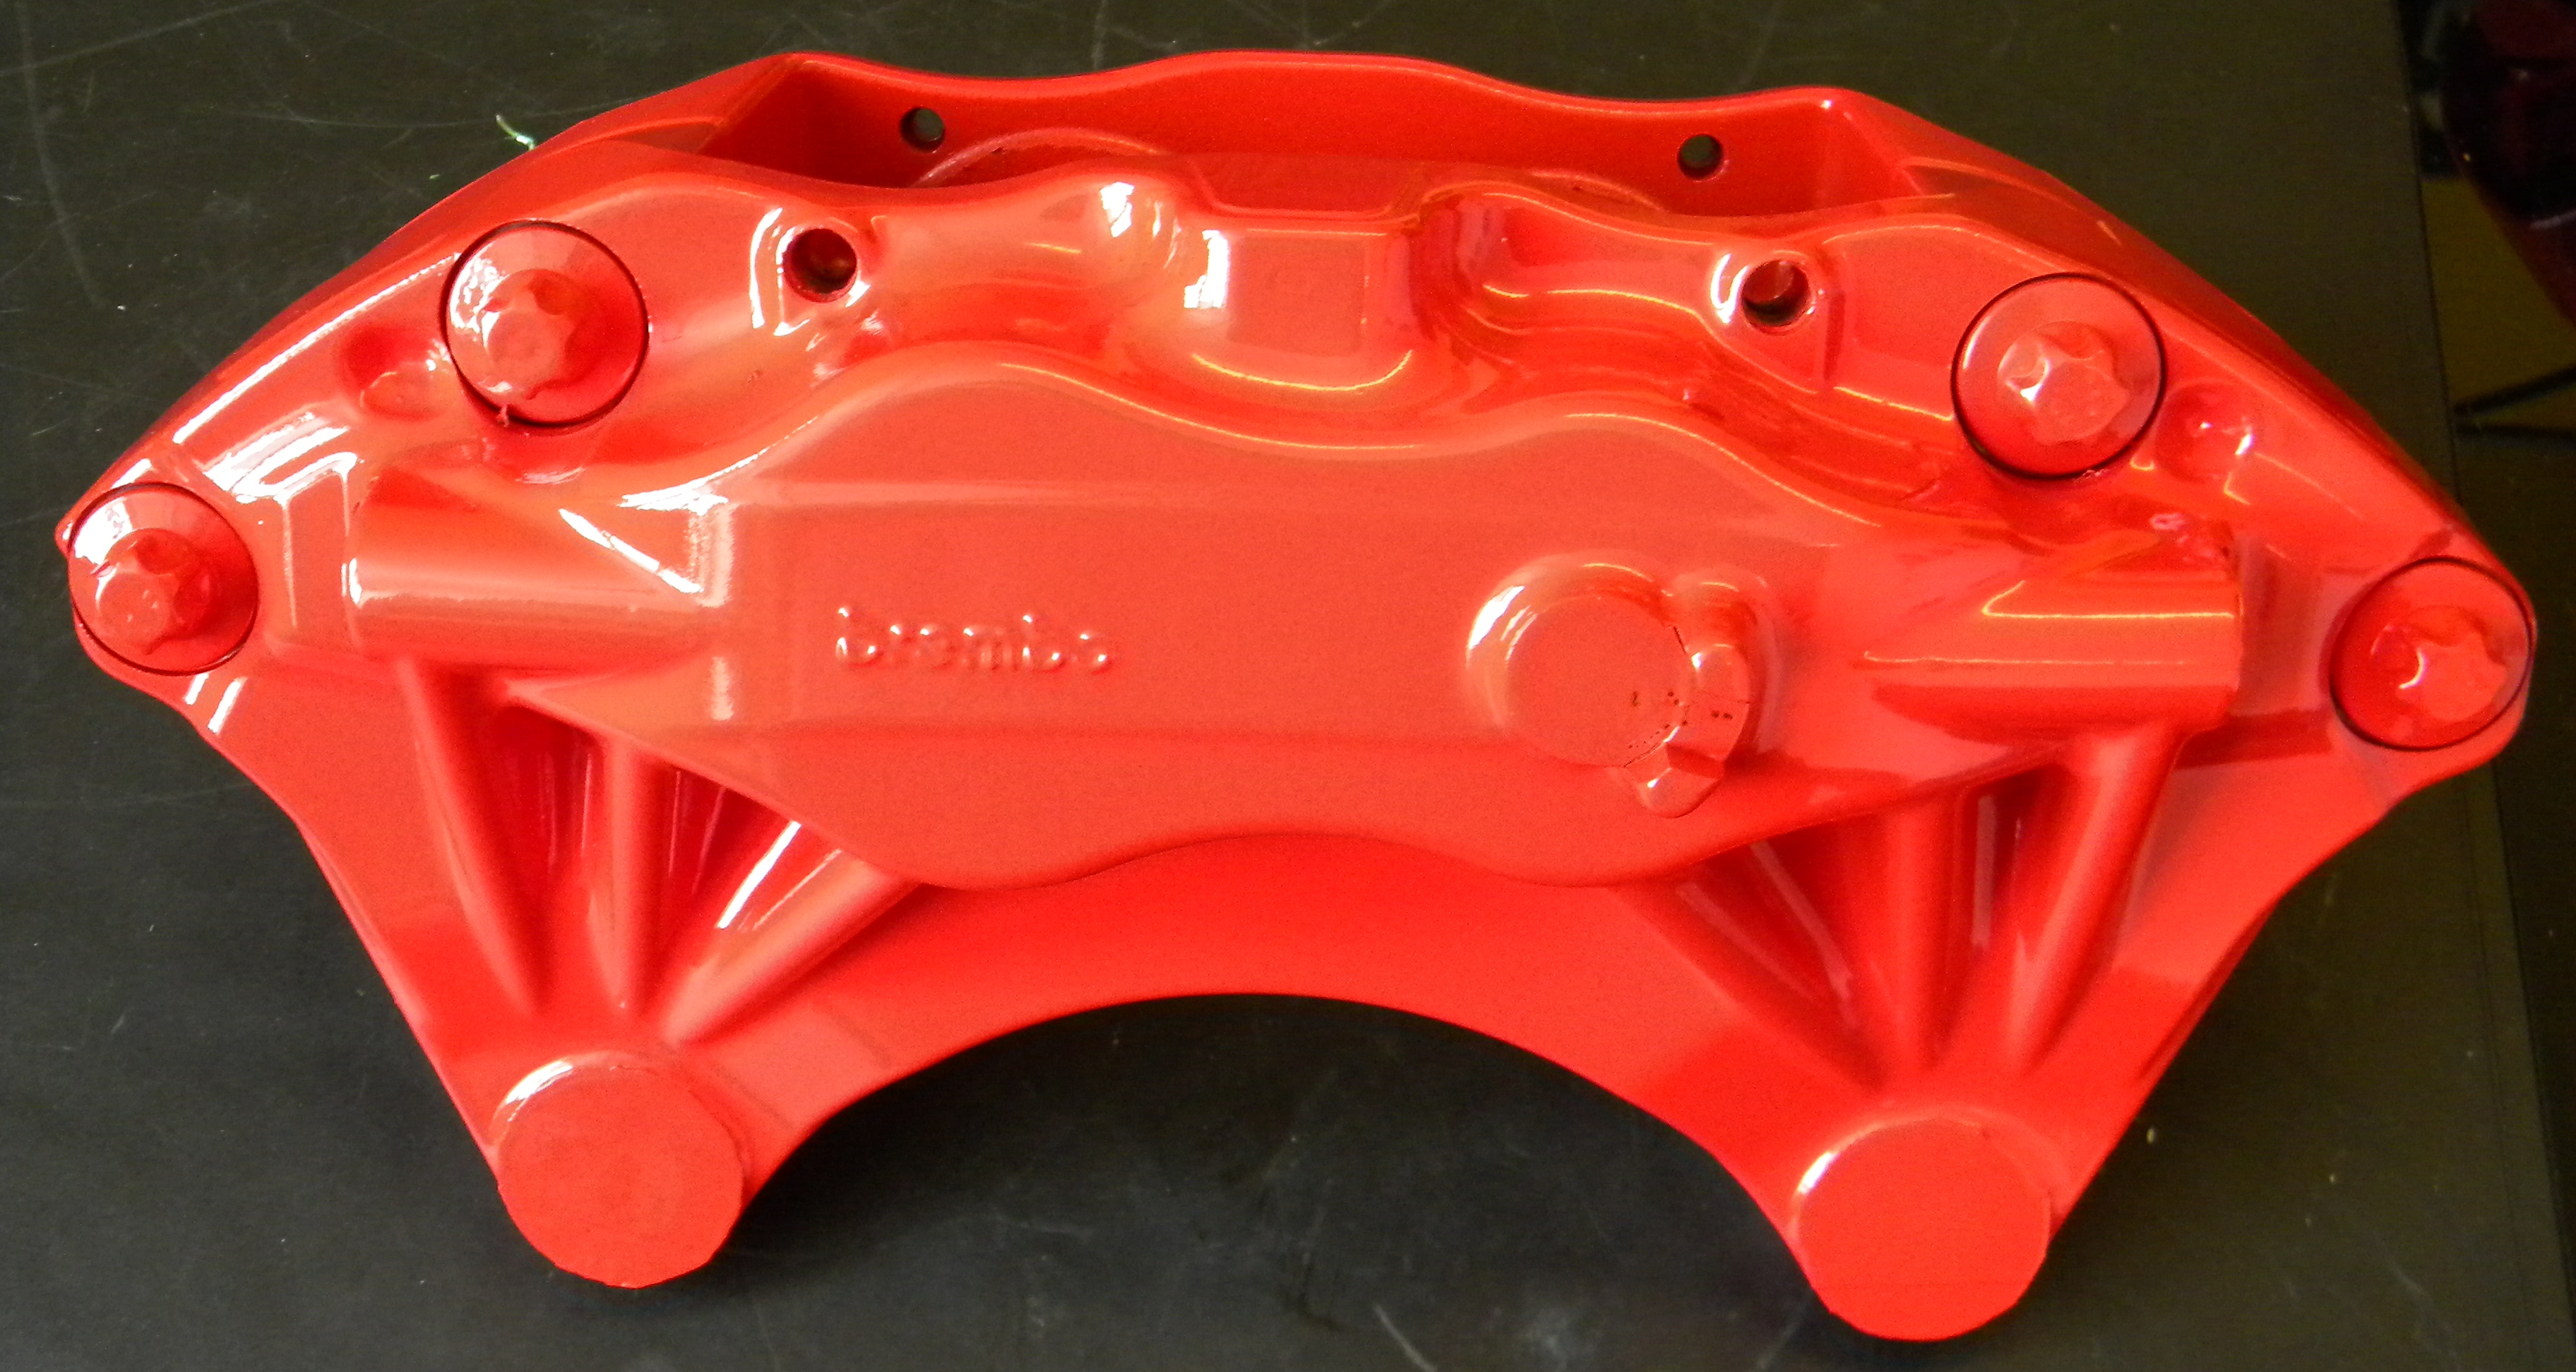 Ian of UK Detailing has just powder coated these Brembo calipers for a Porsche